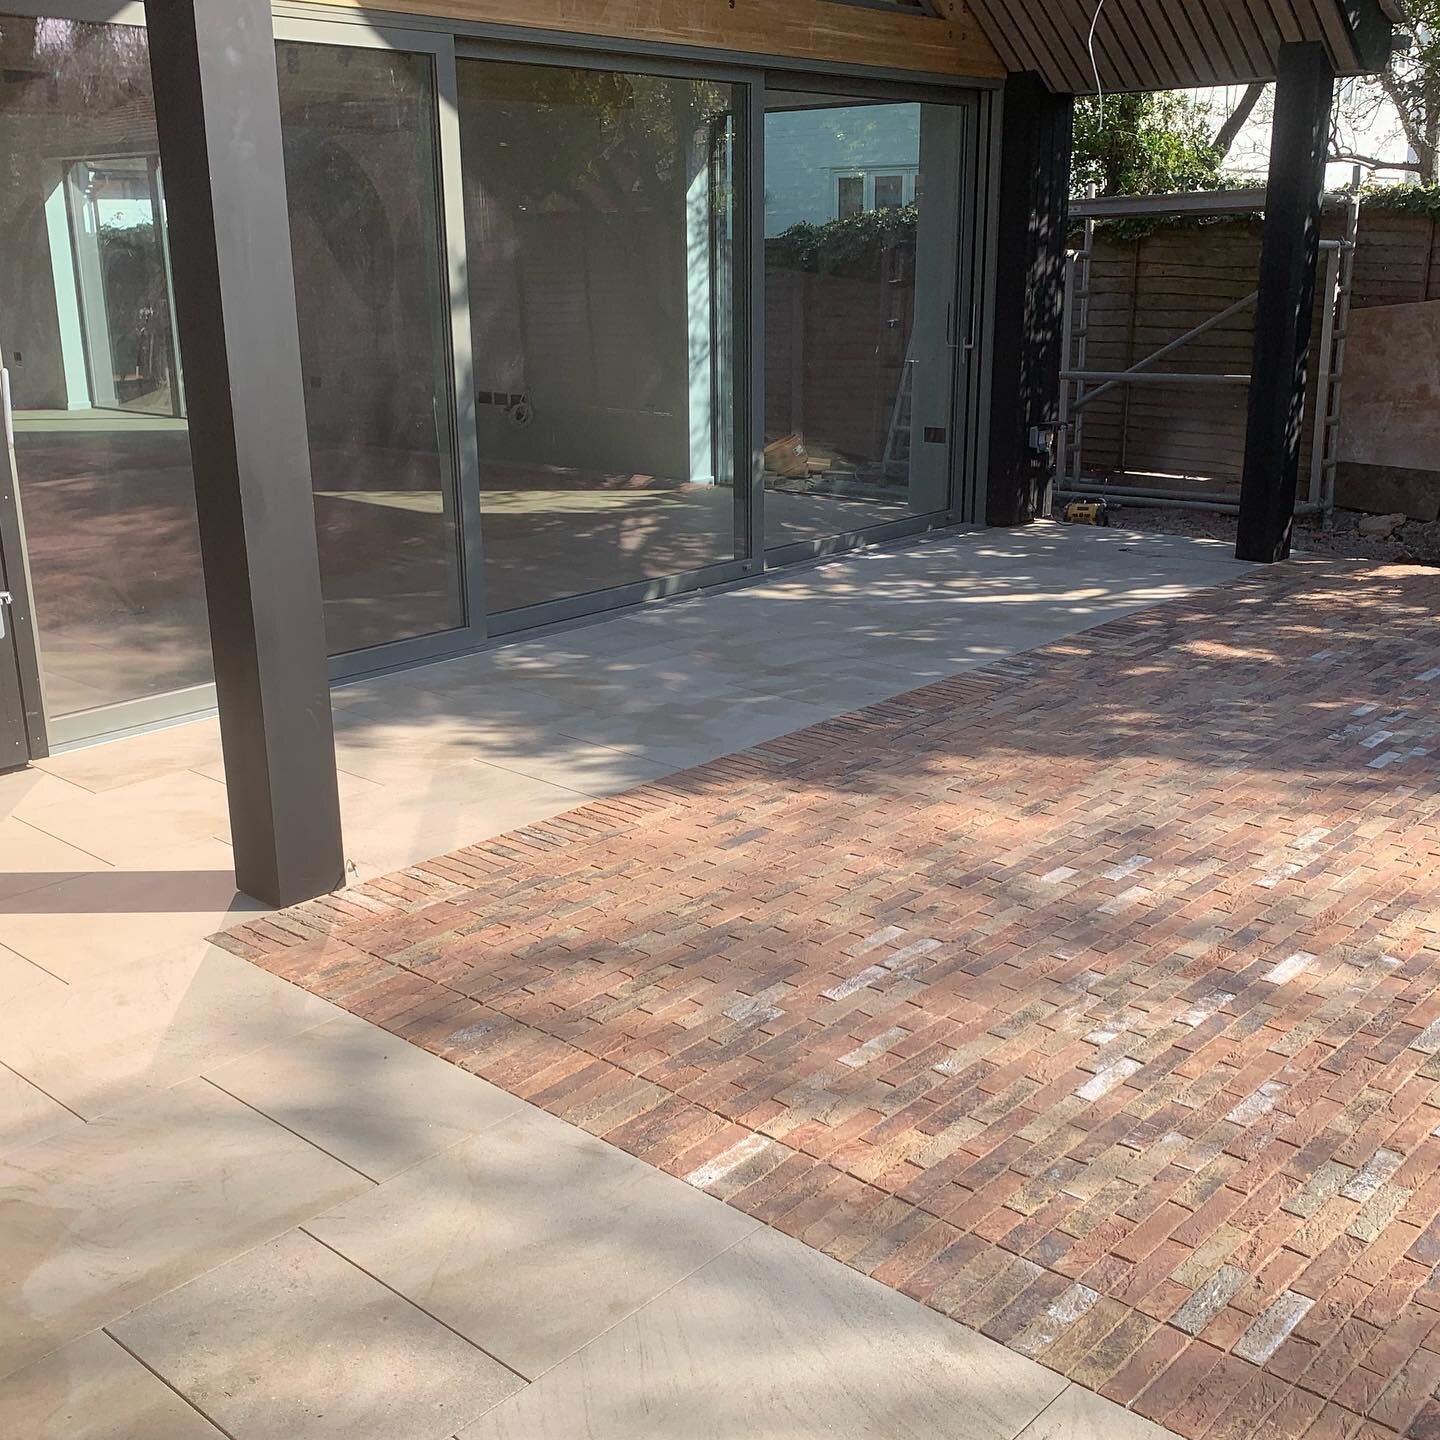 Progress last week using the @chelmervalley pavers alongside beautiful sawn York from @yorkstonesupplies. Great working with big bro @martinswatton on this project where he&rsquo;s designed the building #yorkstonepaving #brickpavers #landscapedesign 